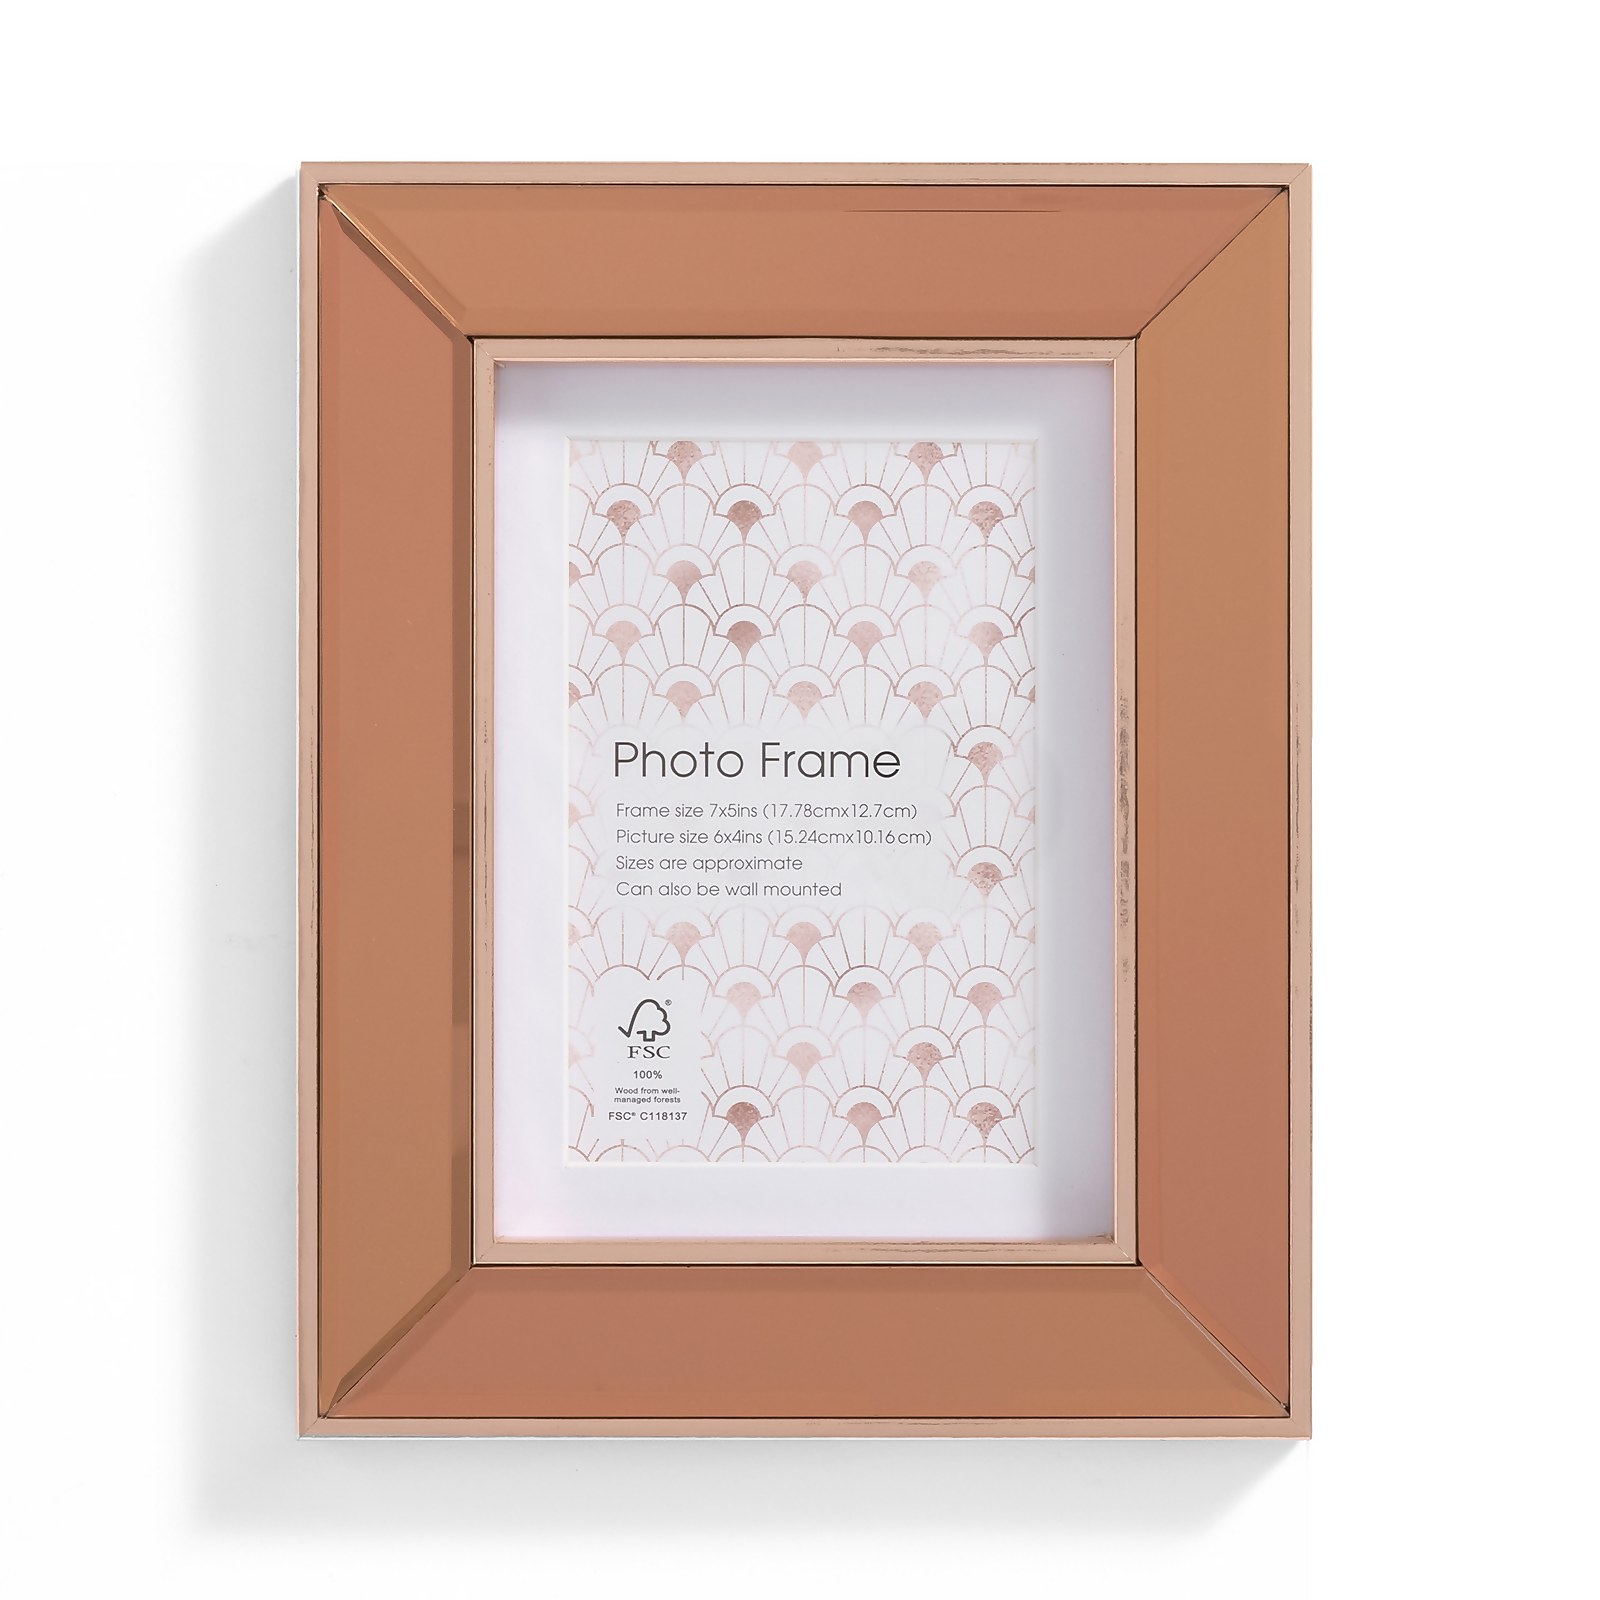 Photo of Bevelled Photo Frame - 6x4in - Rose Gold